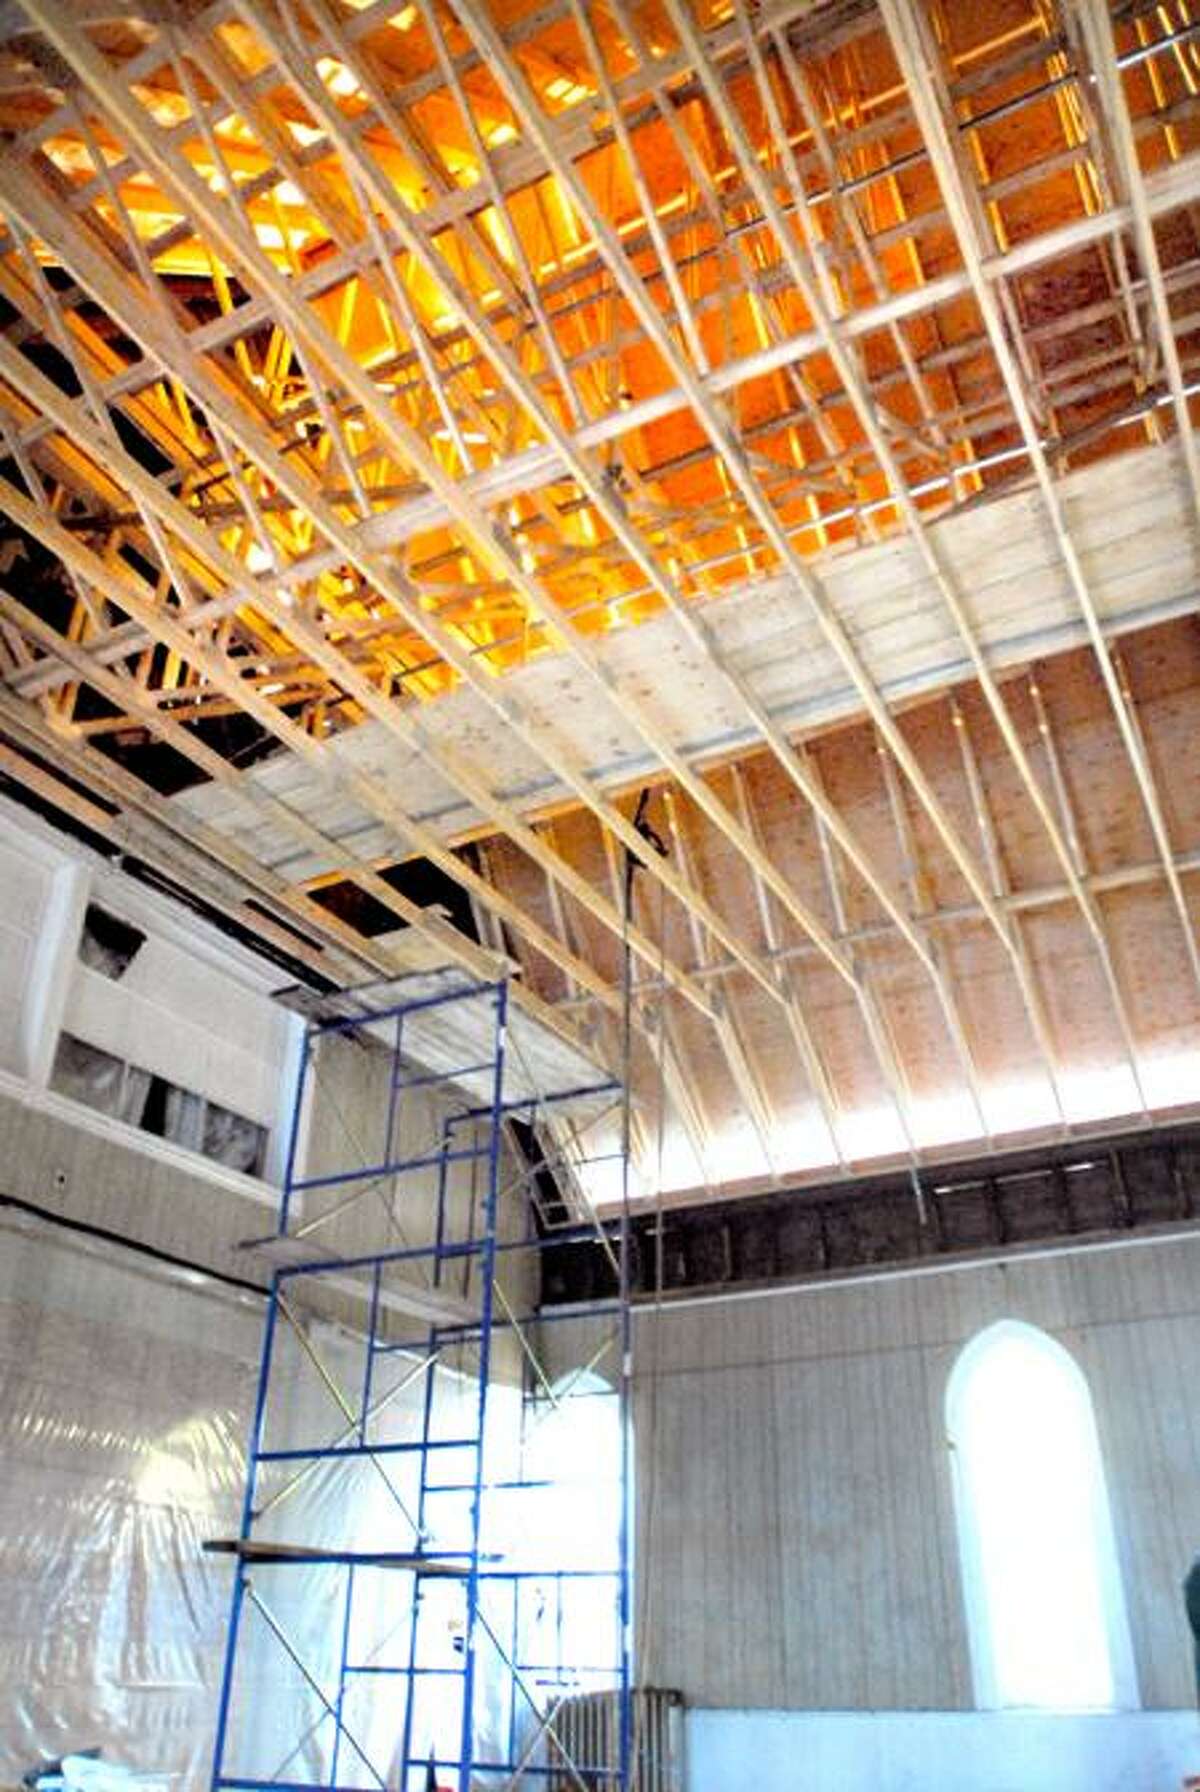 The roof under construction can be seen in the sanctuary at the New Light Holy Church on Howard Avenue in New Haven. Photo by Arnold Gold/New Haven Register